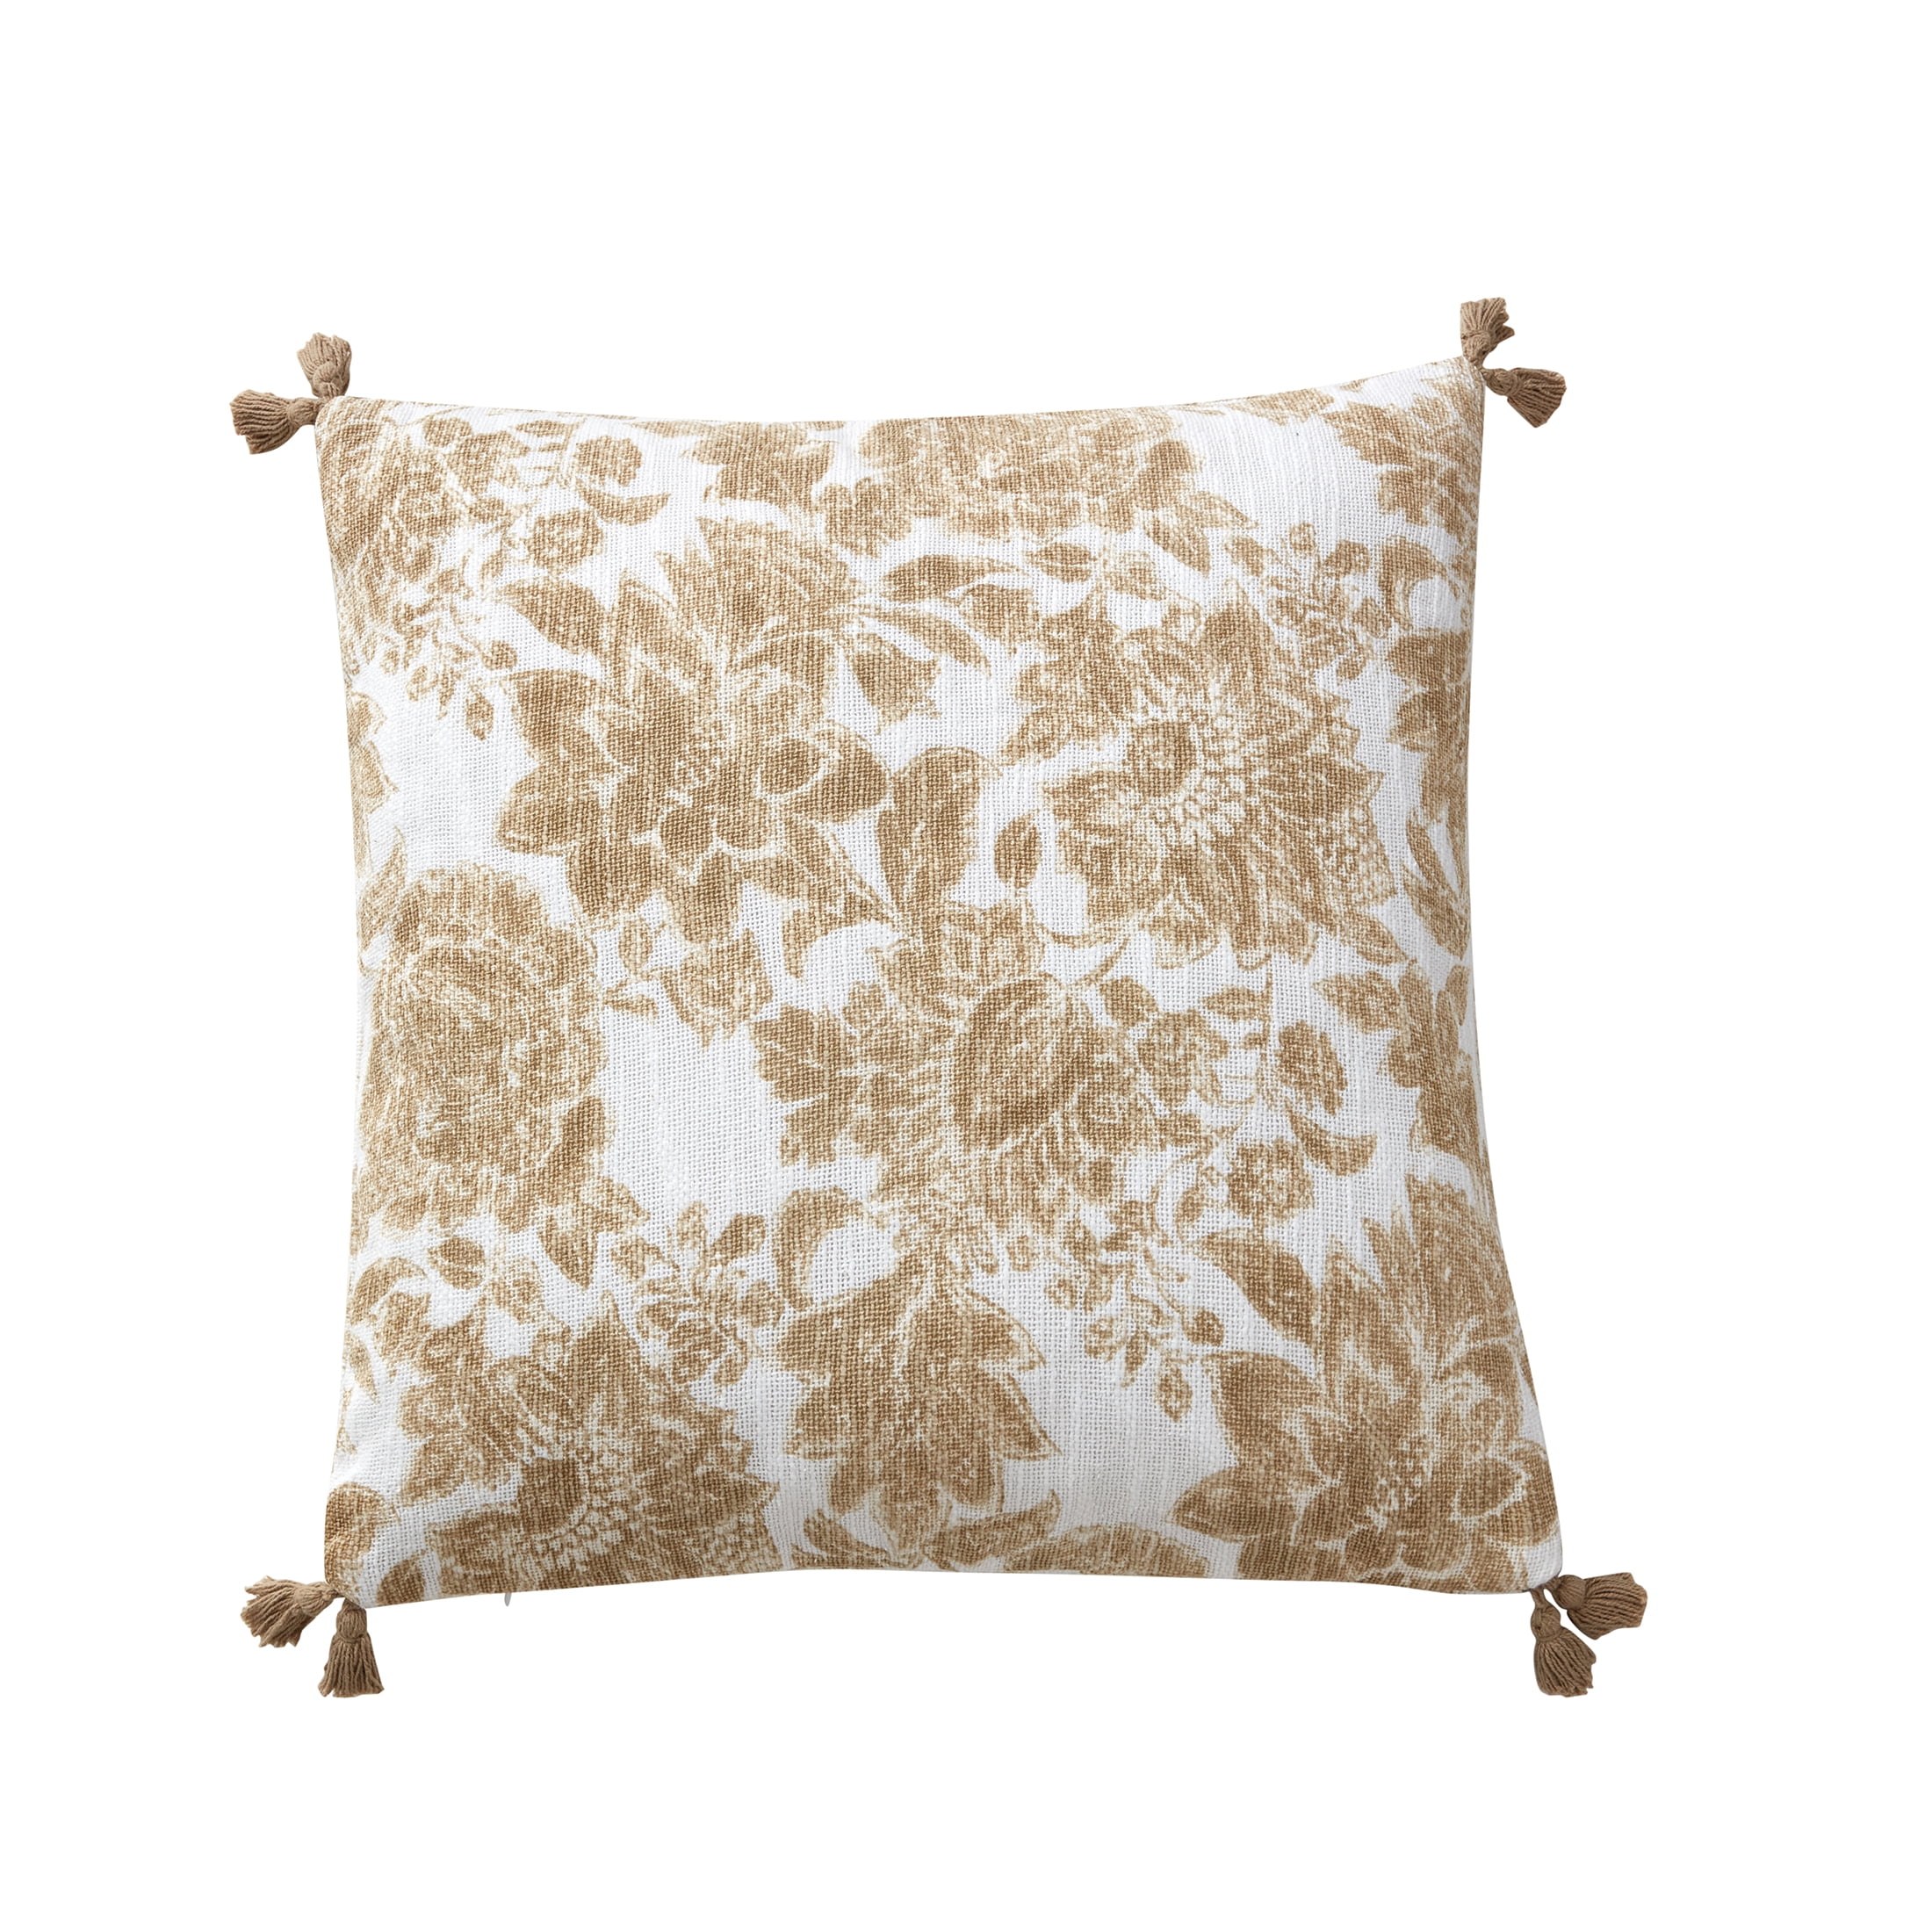 X4 Black with Gold Floral Detail Cushion Covers 18x18" Extra Thick Material 